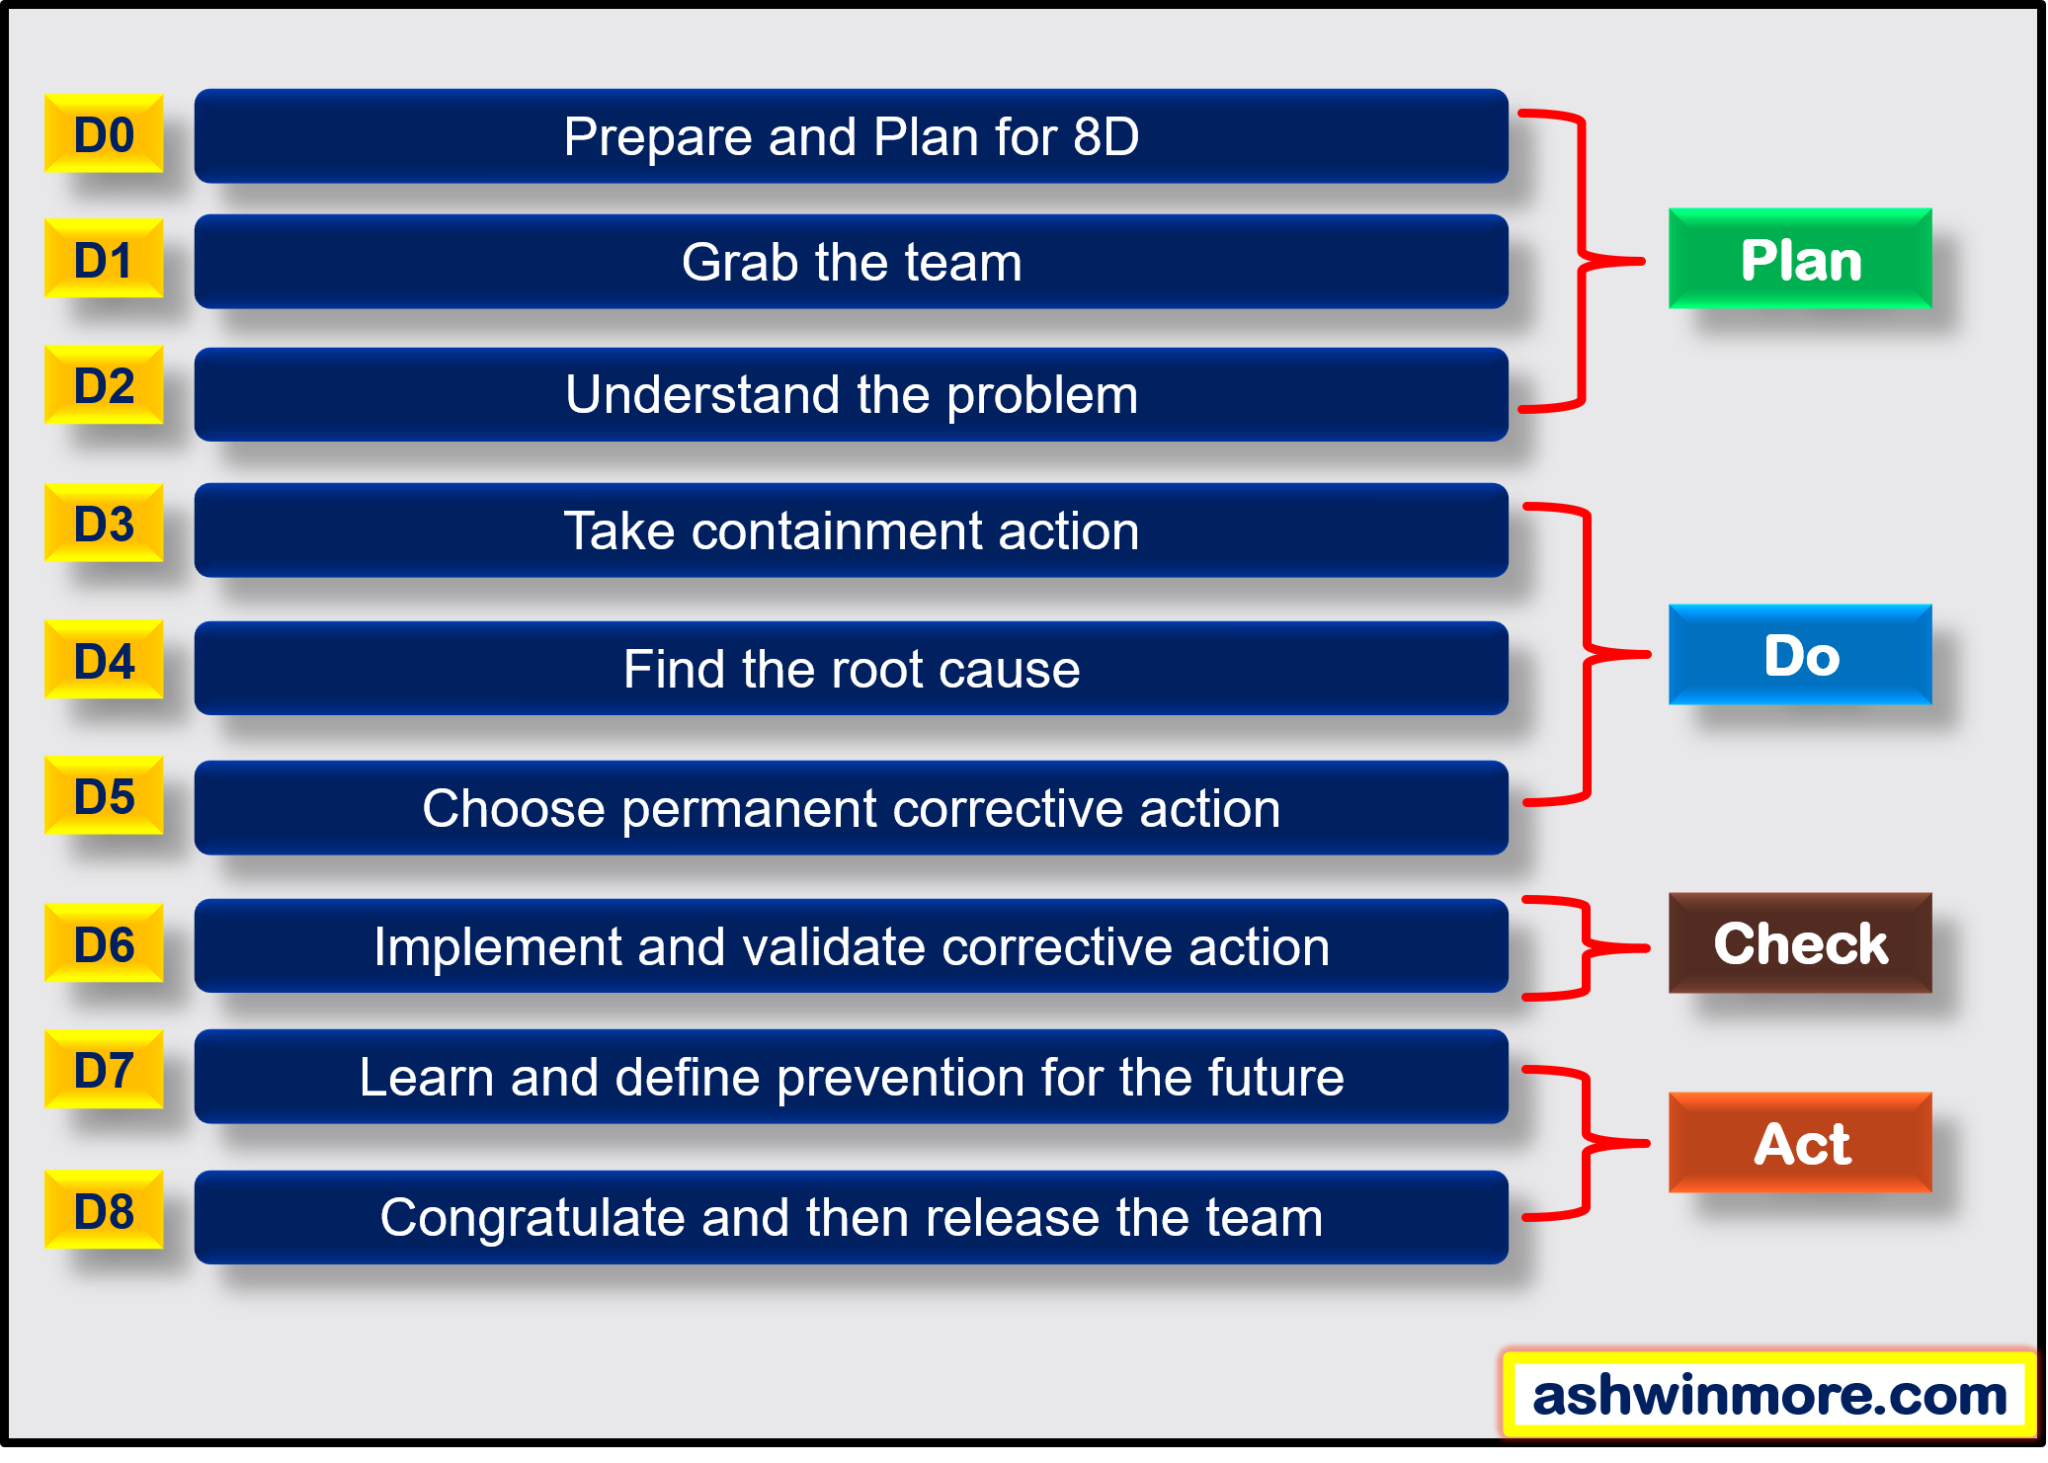 8 d problem solving overview from the ford motor company